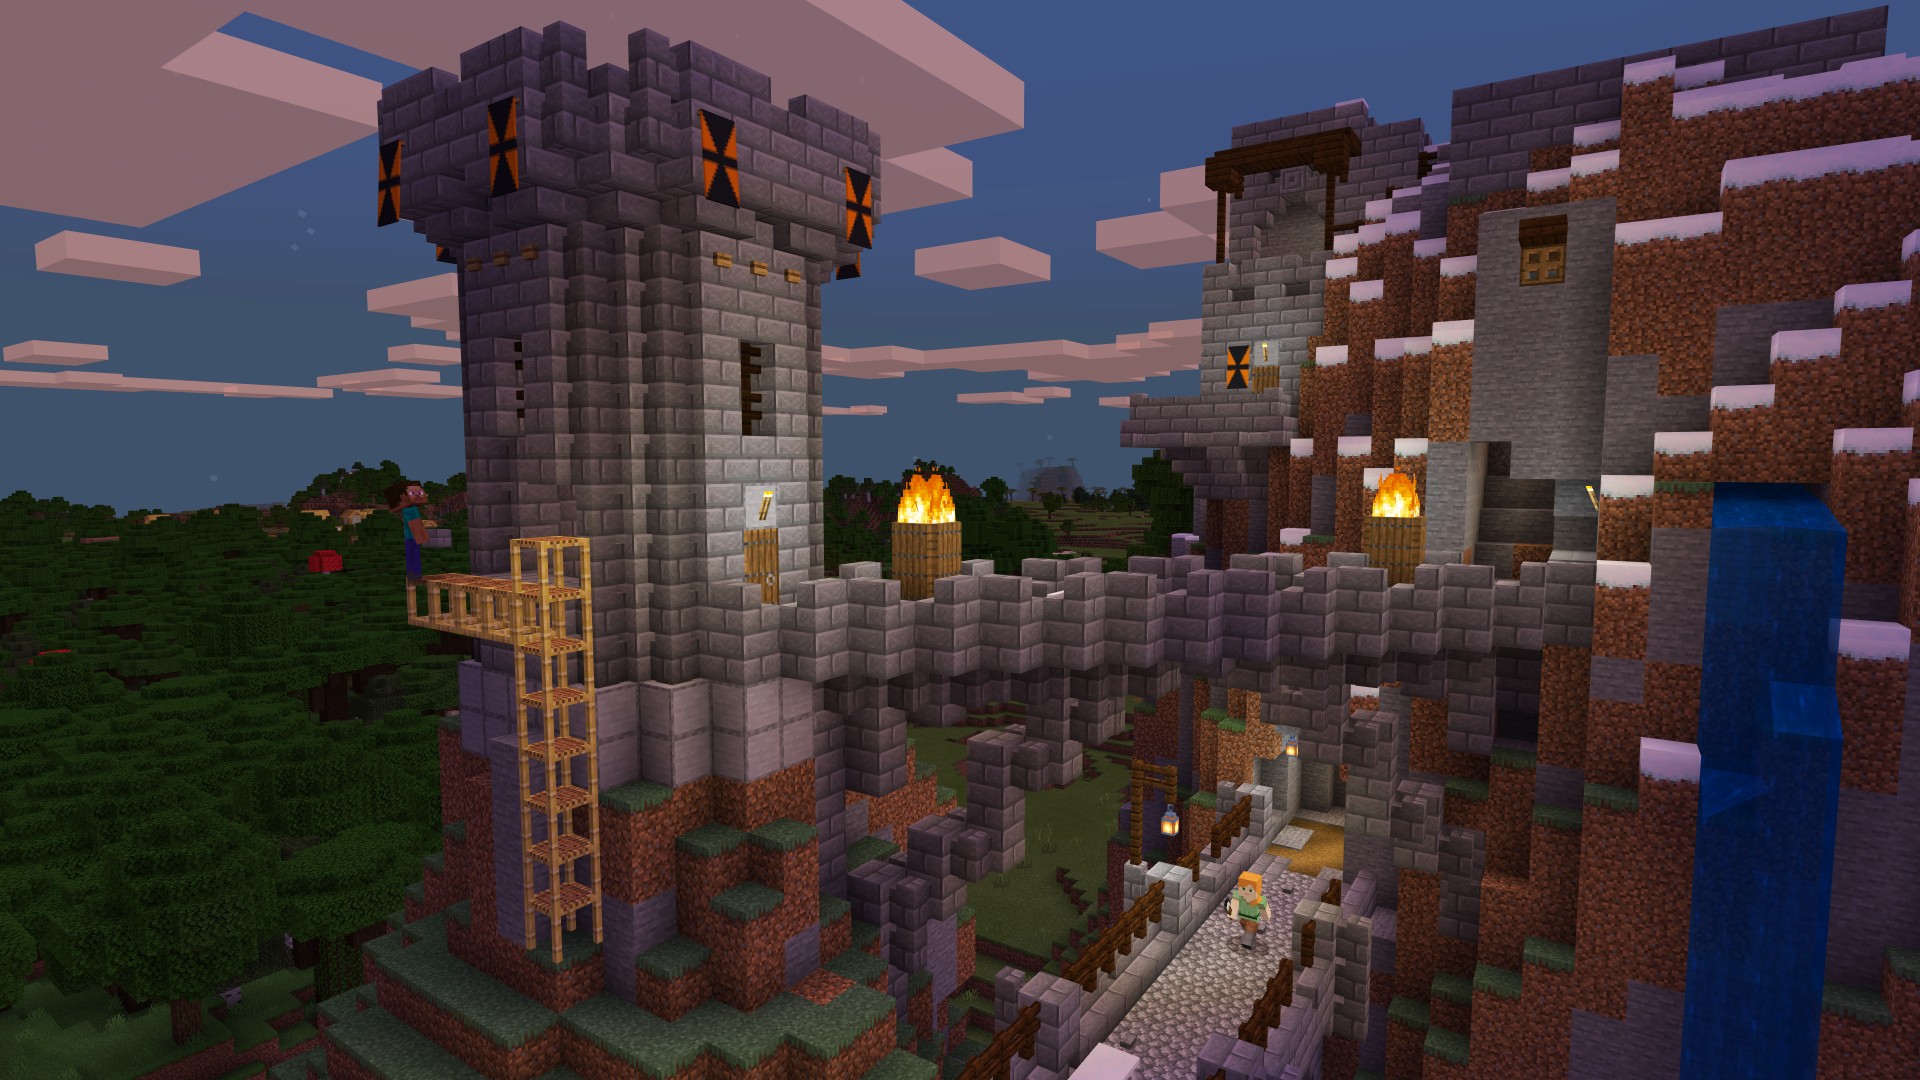 A player made castle in Minecraft, one of the best laptop games